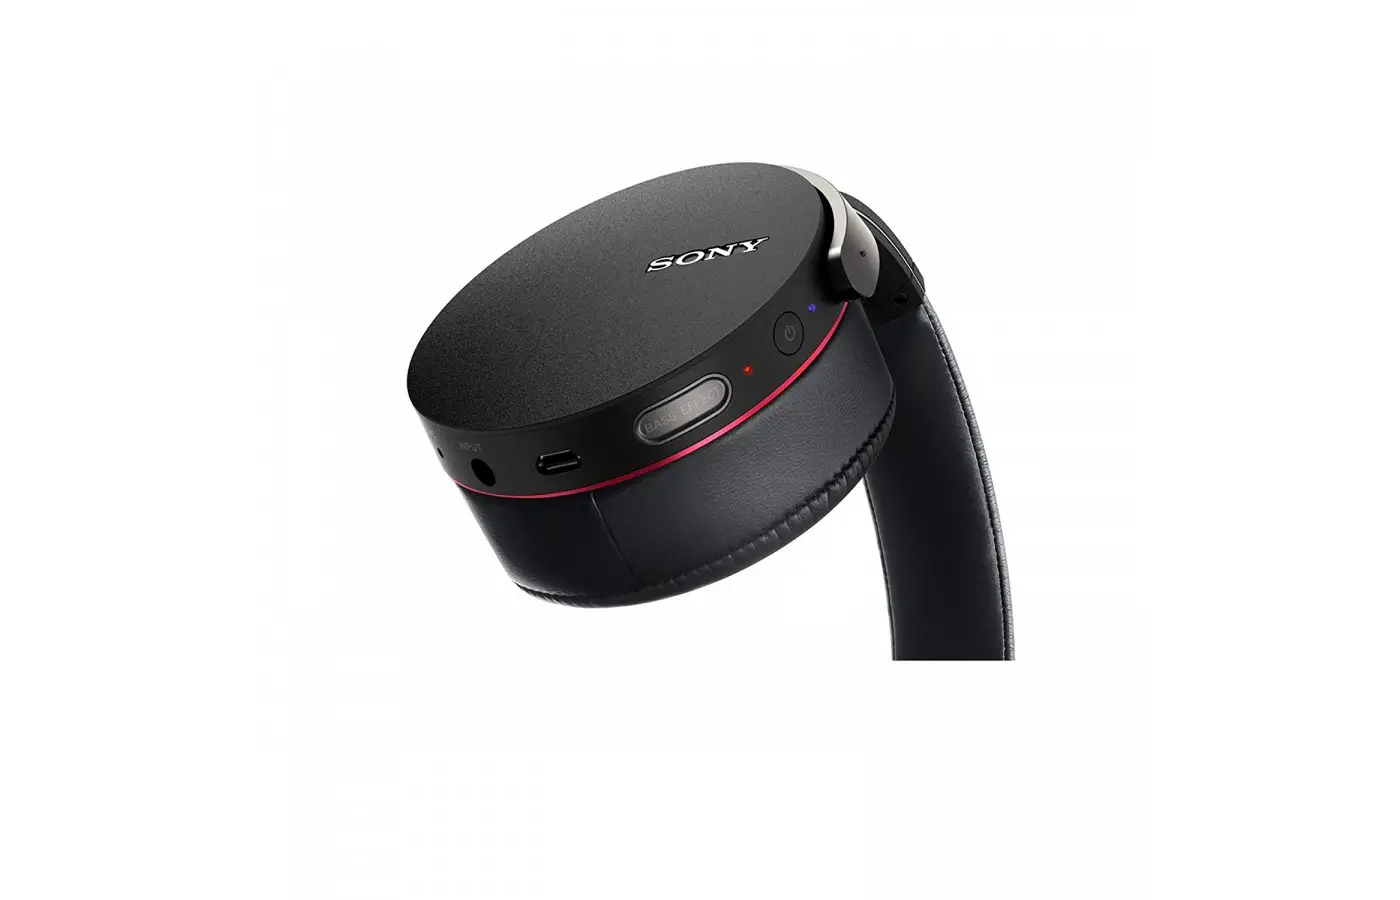 Sony XB950B1 offer rotating ear cups for easier transport and storage.